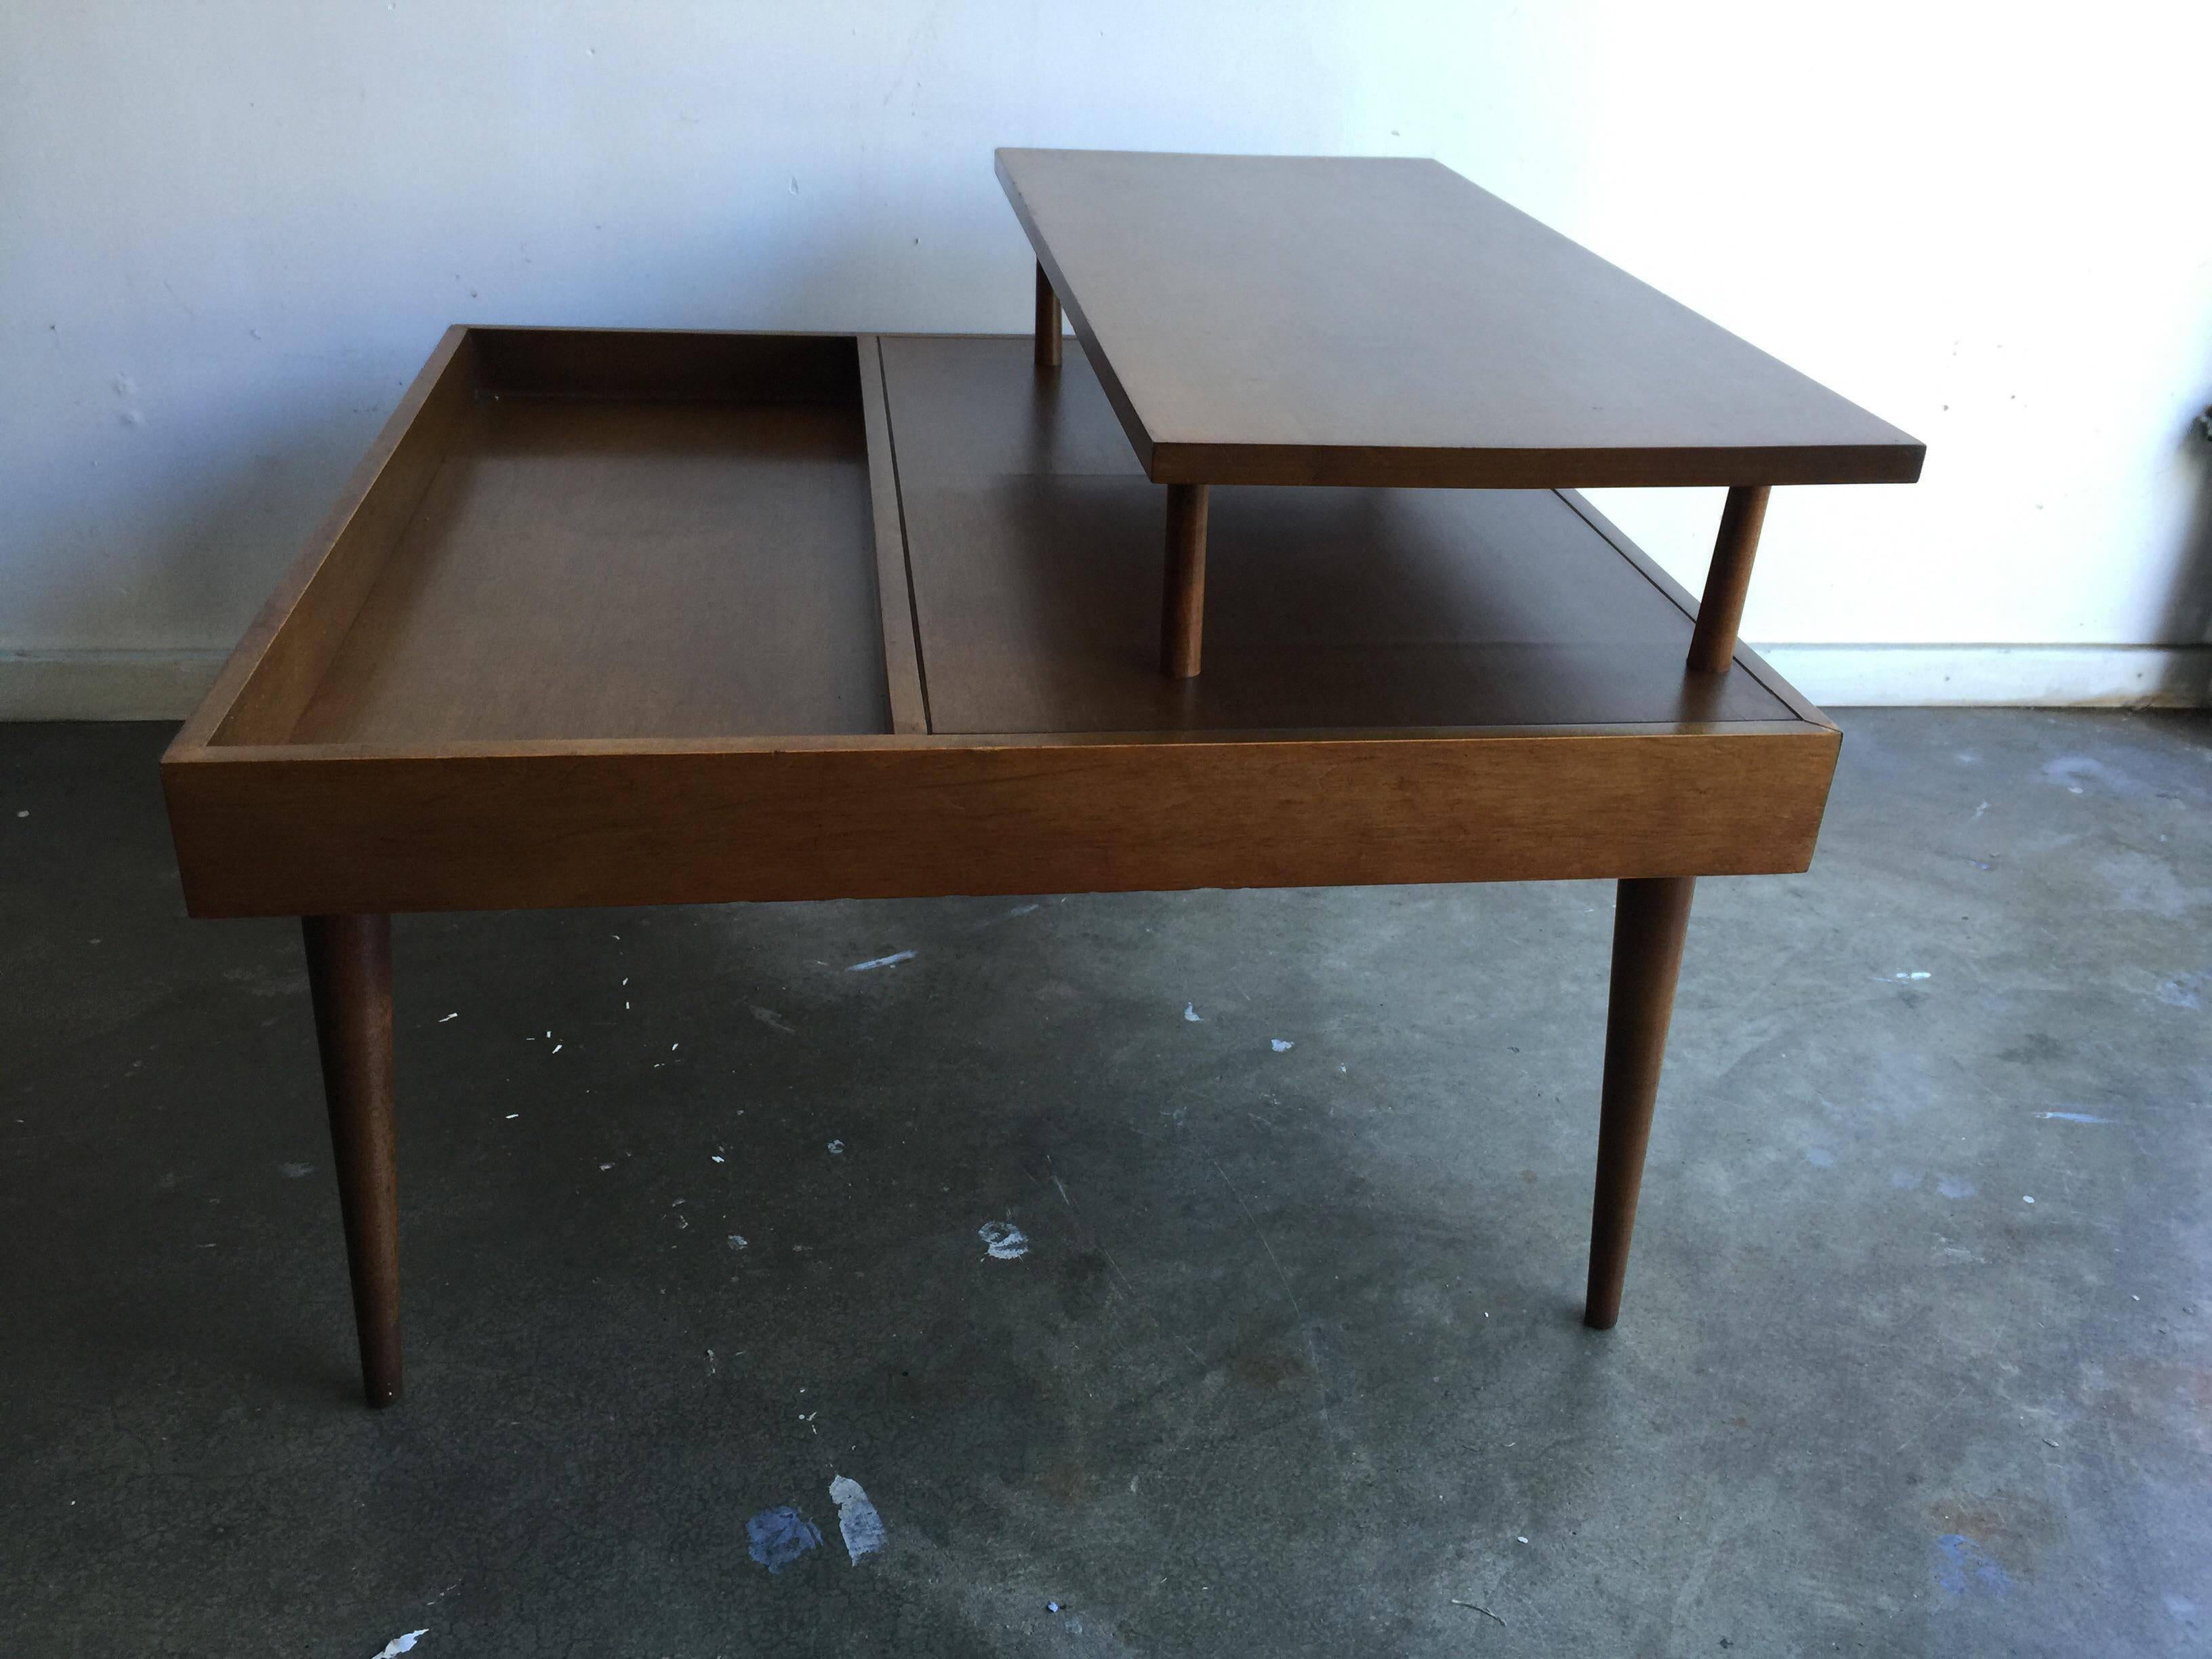 Mid-Century Modern step table by Paul McCobb Planner Group for Winchendon.